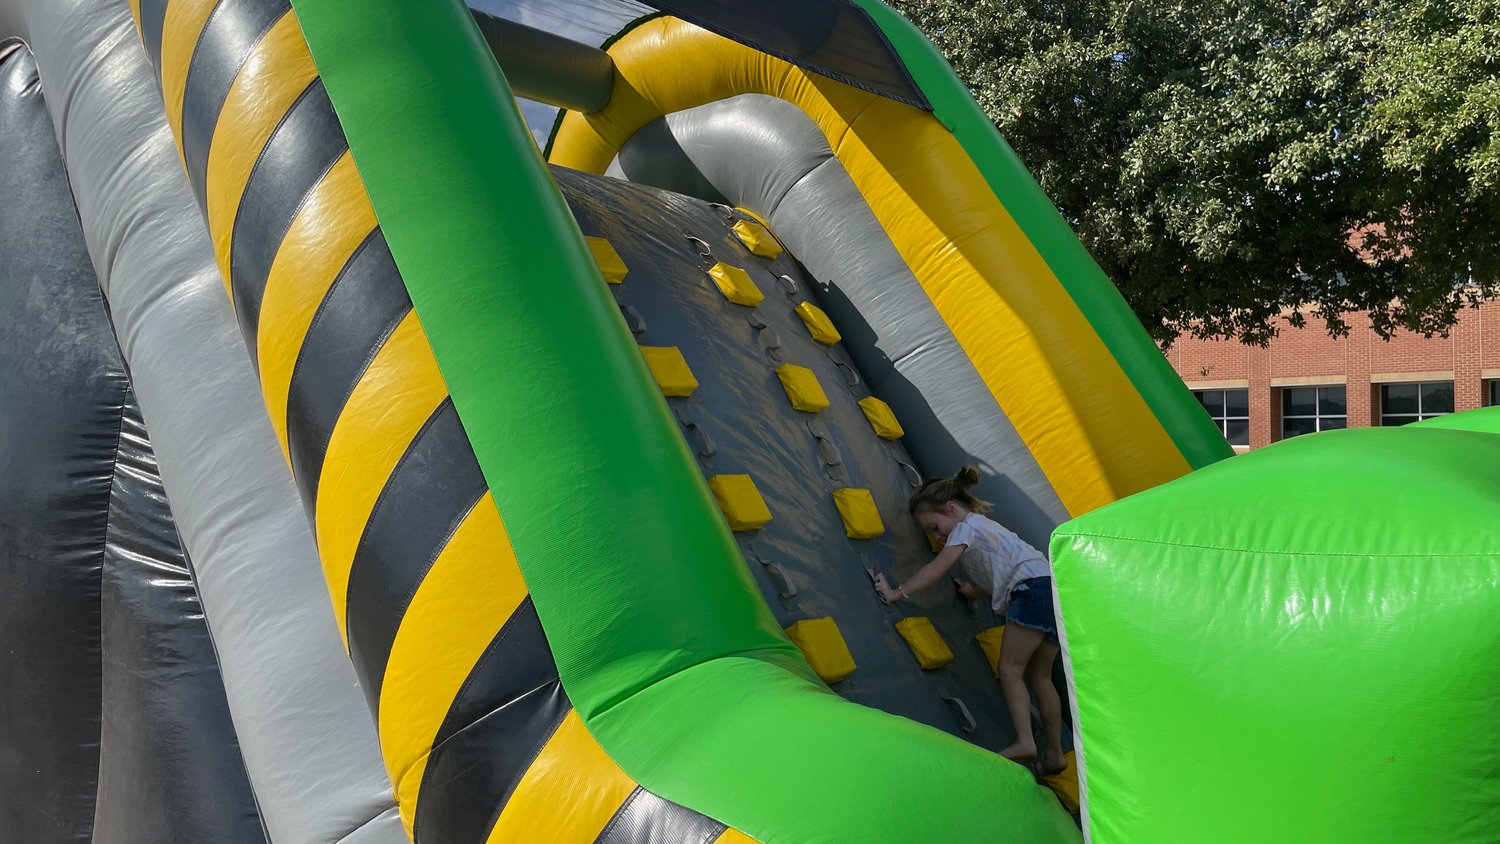 Inflatable slides are always popular at events.